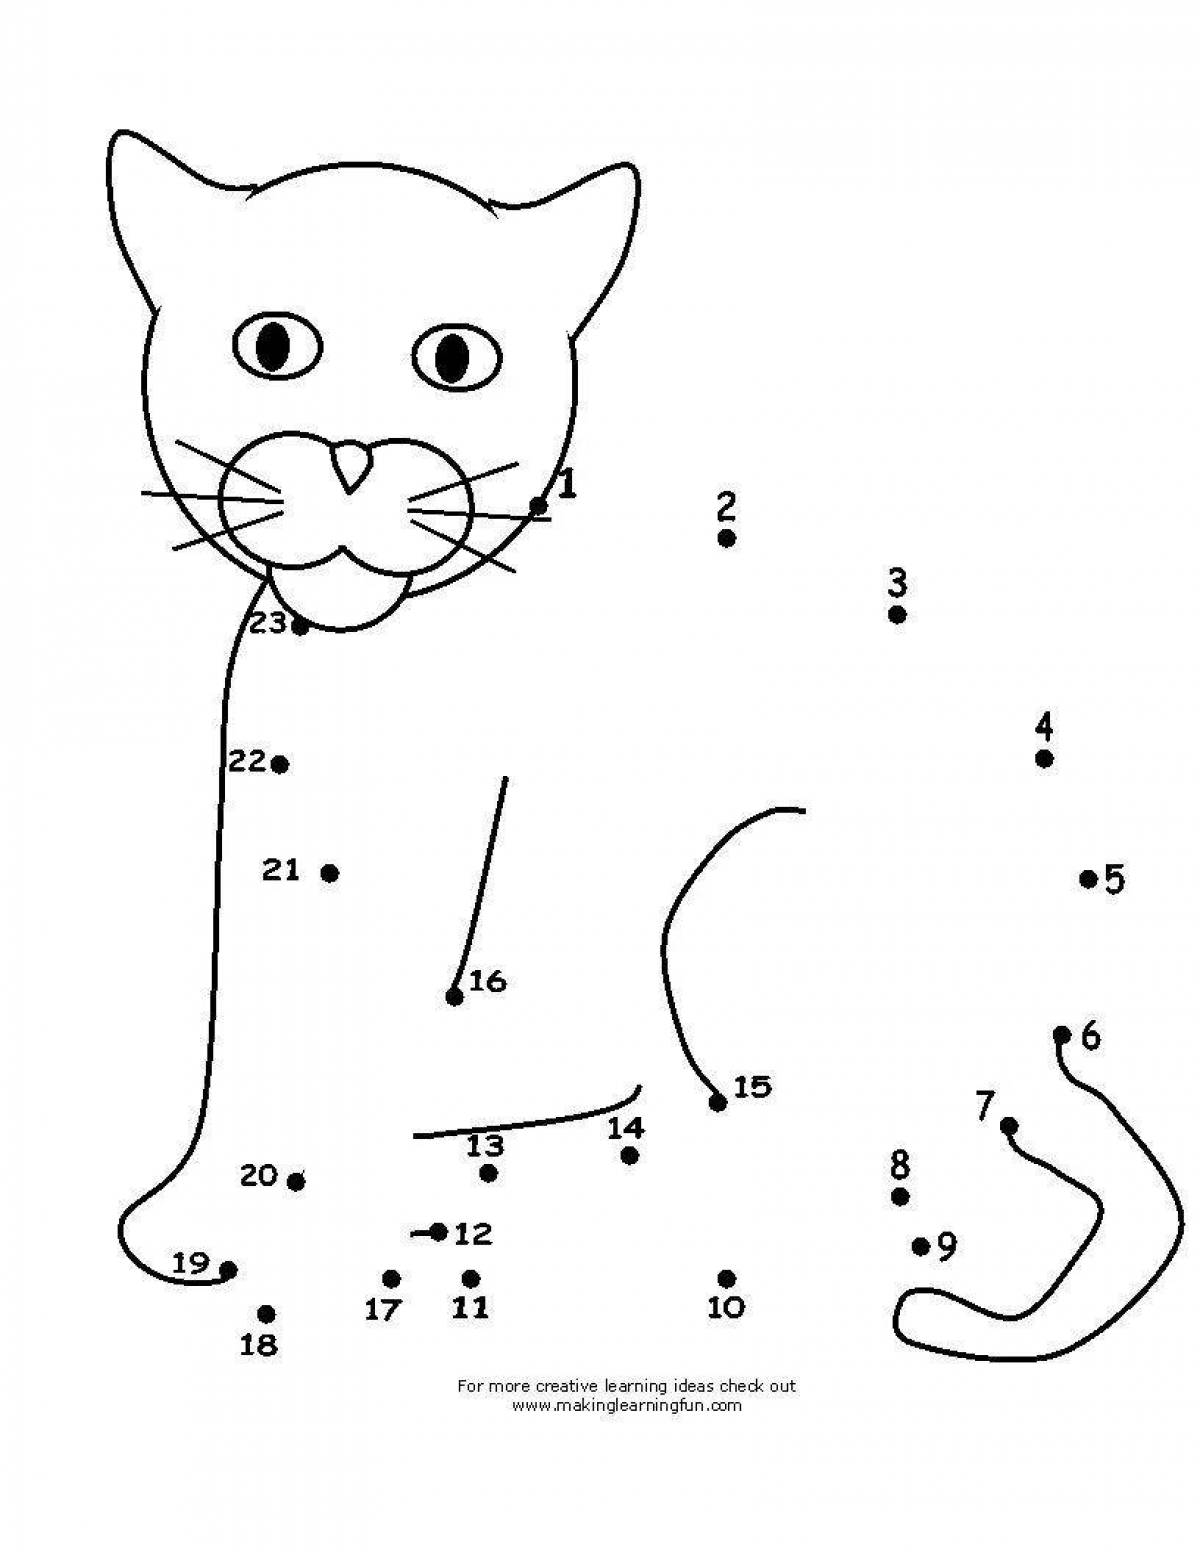 Adorable dotted cat coloring page